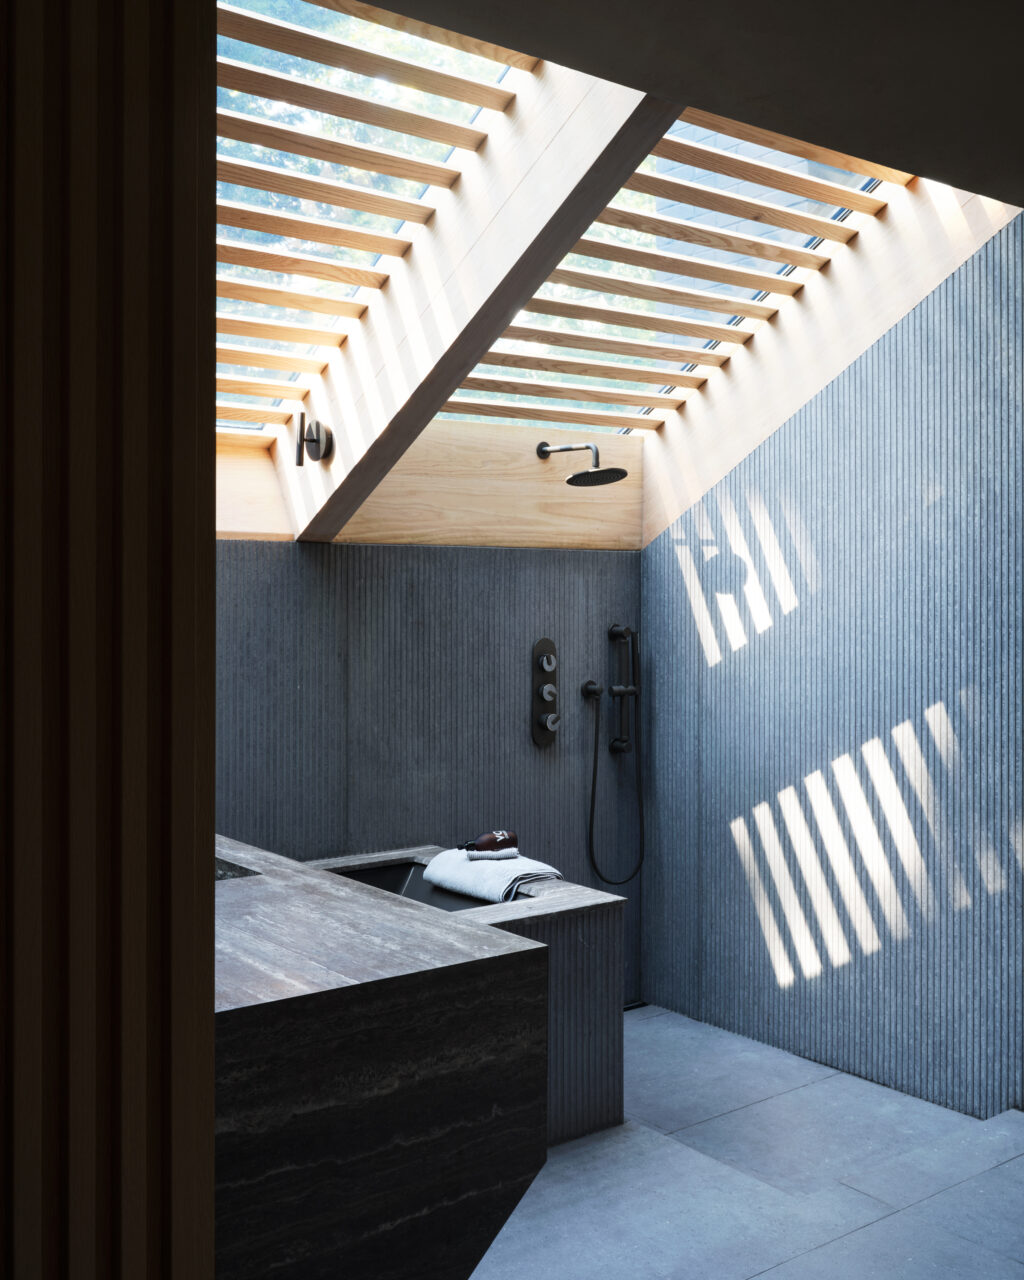 The primary bath’s tub is lit underneath a skylight fitted with wooden slats